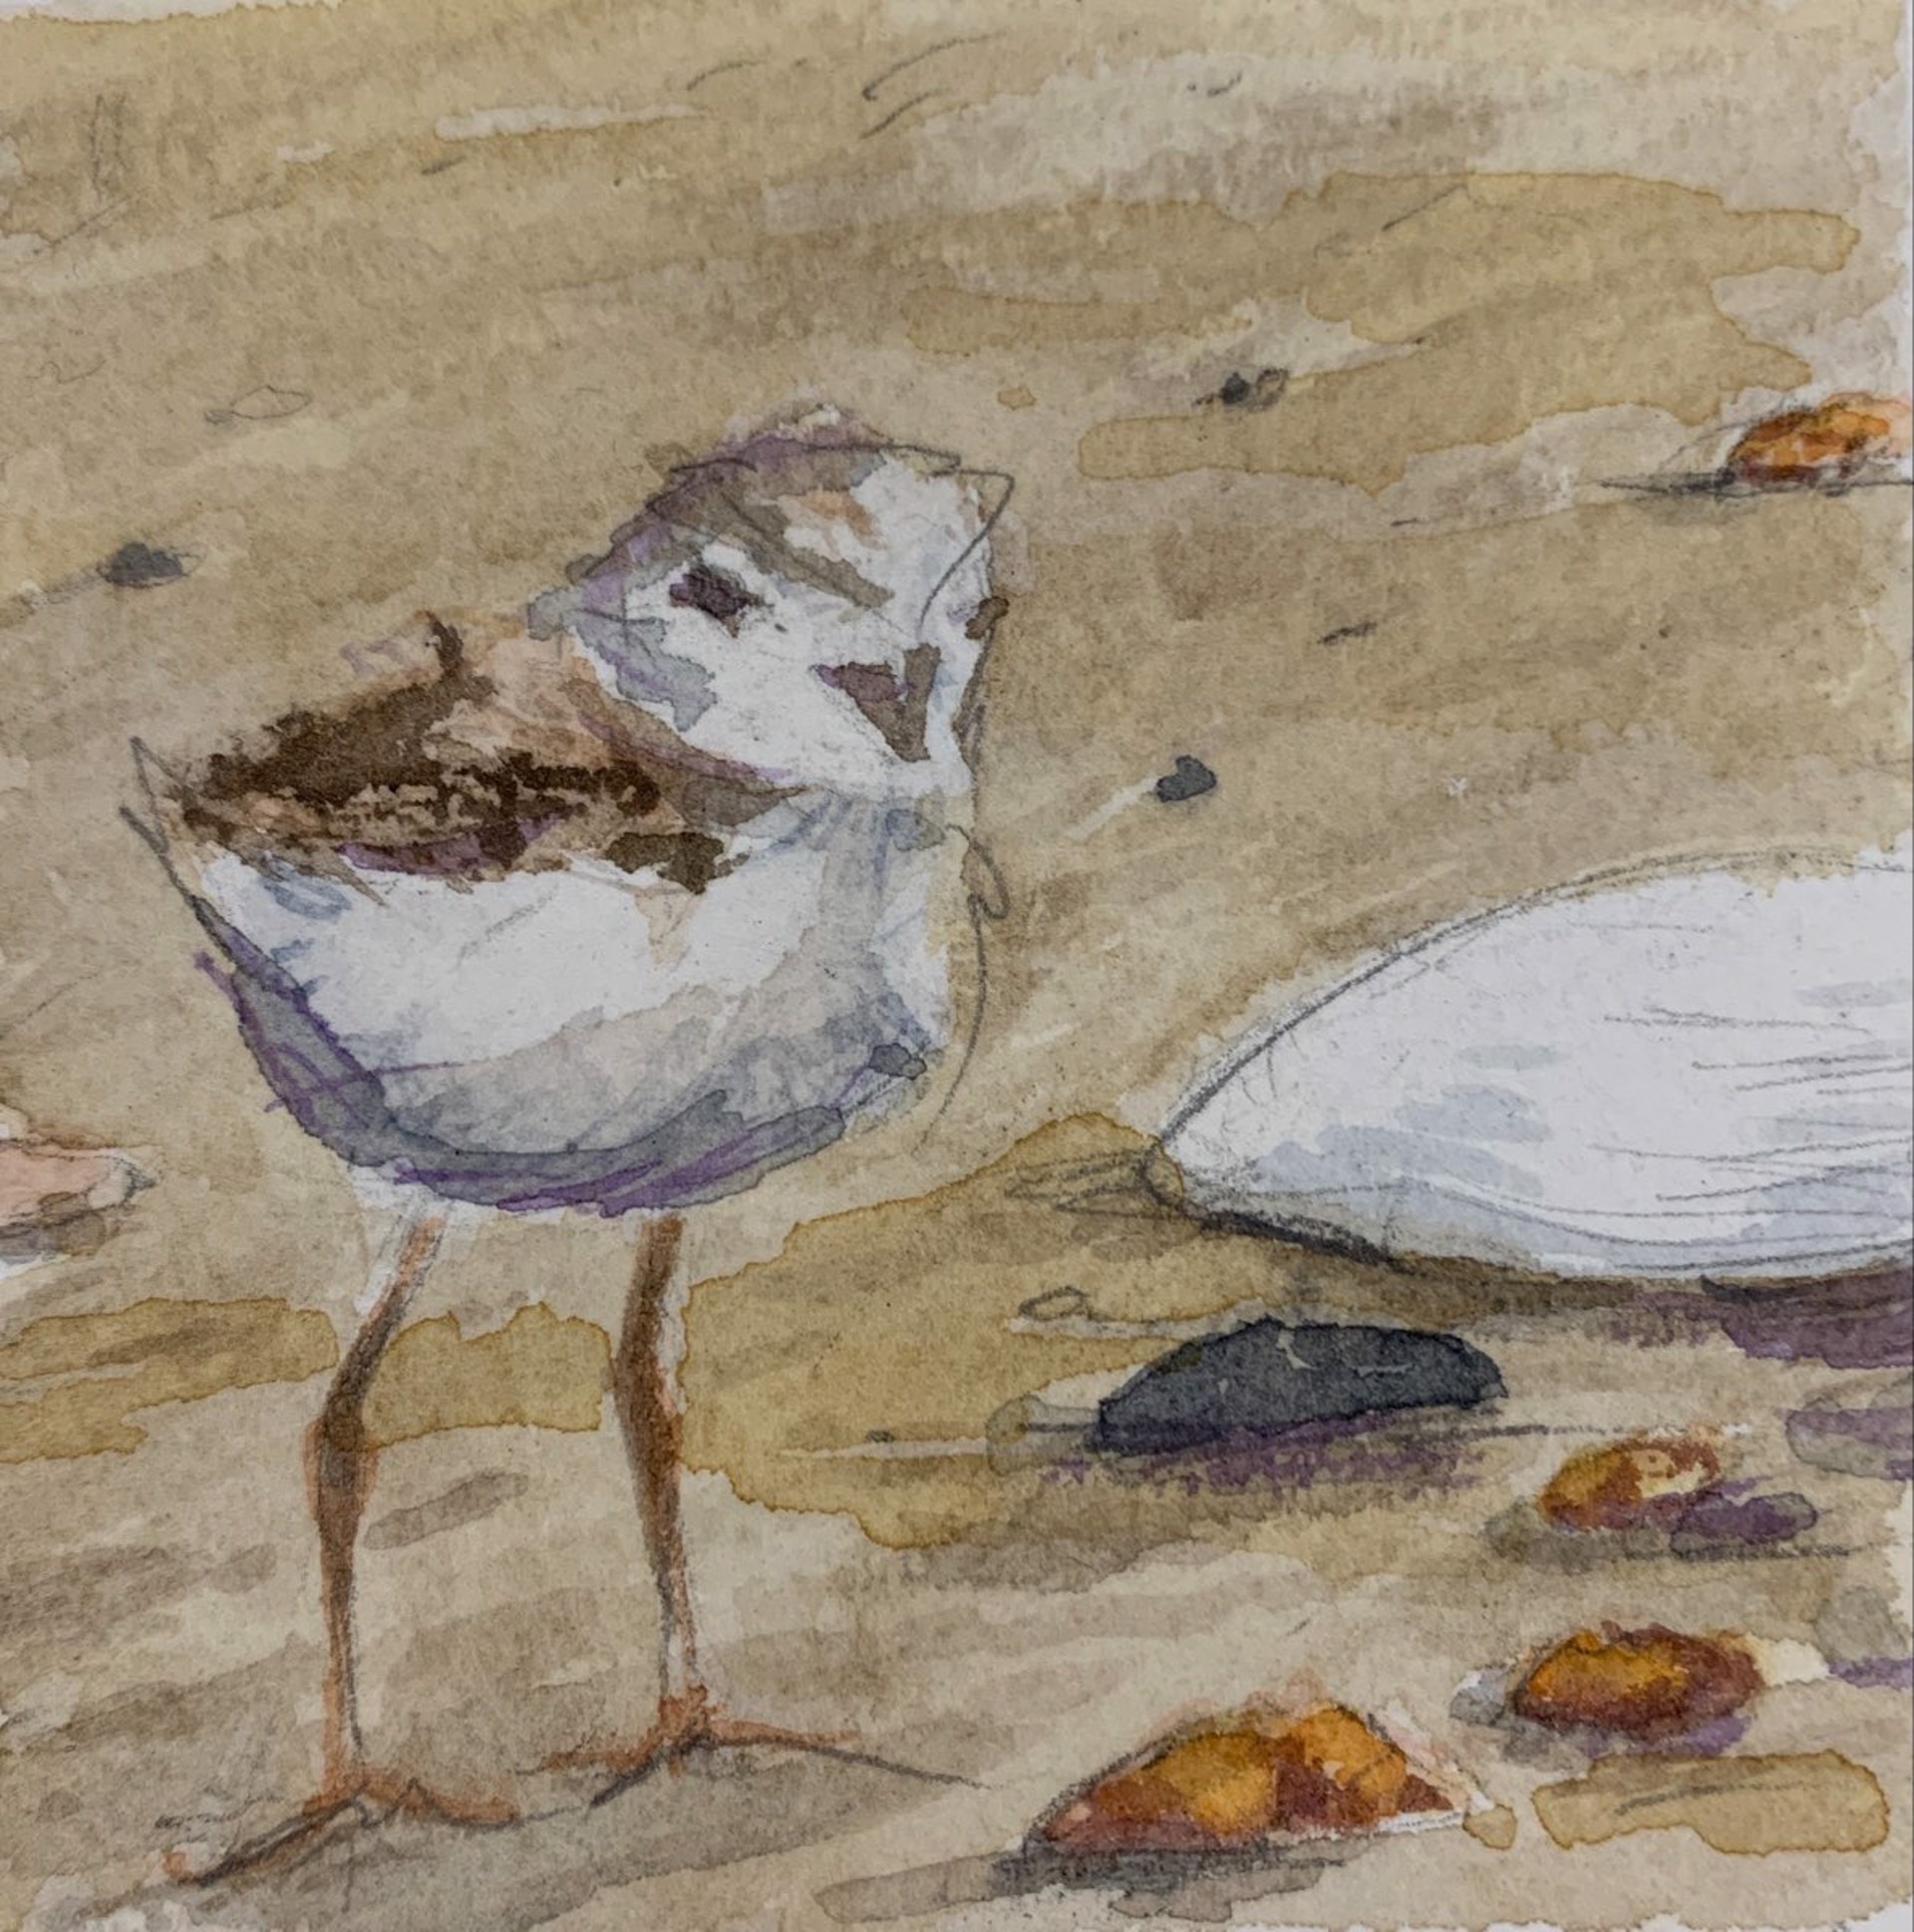 Caught by the Plover by Allison Charles